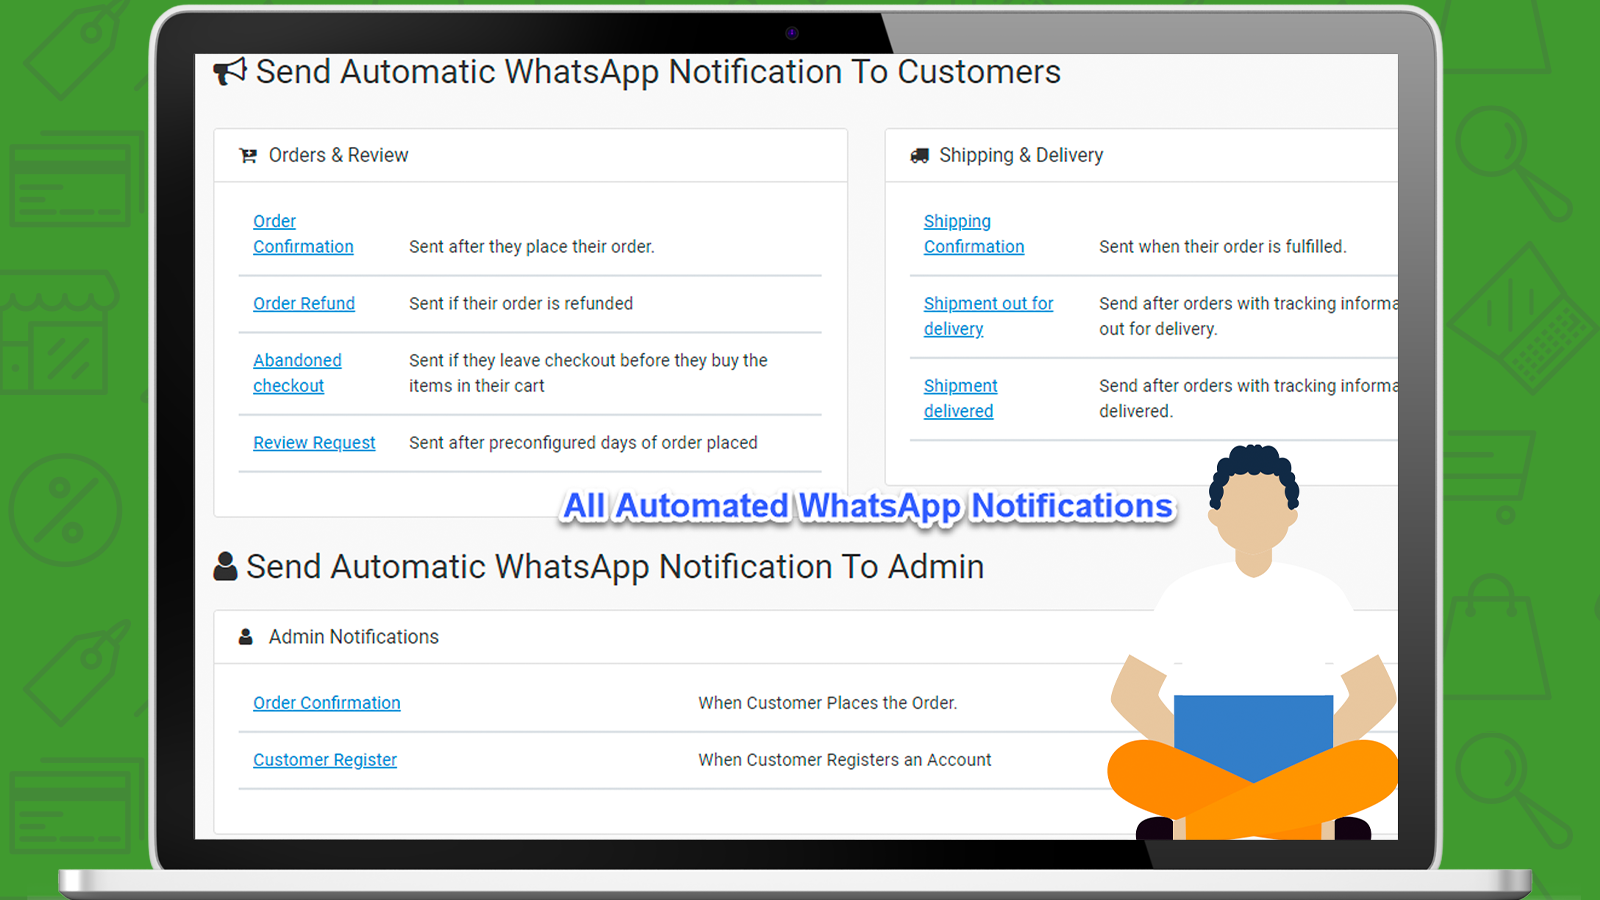 All Available Automated WhatsApp Notifications